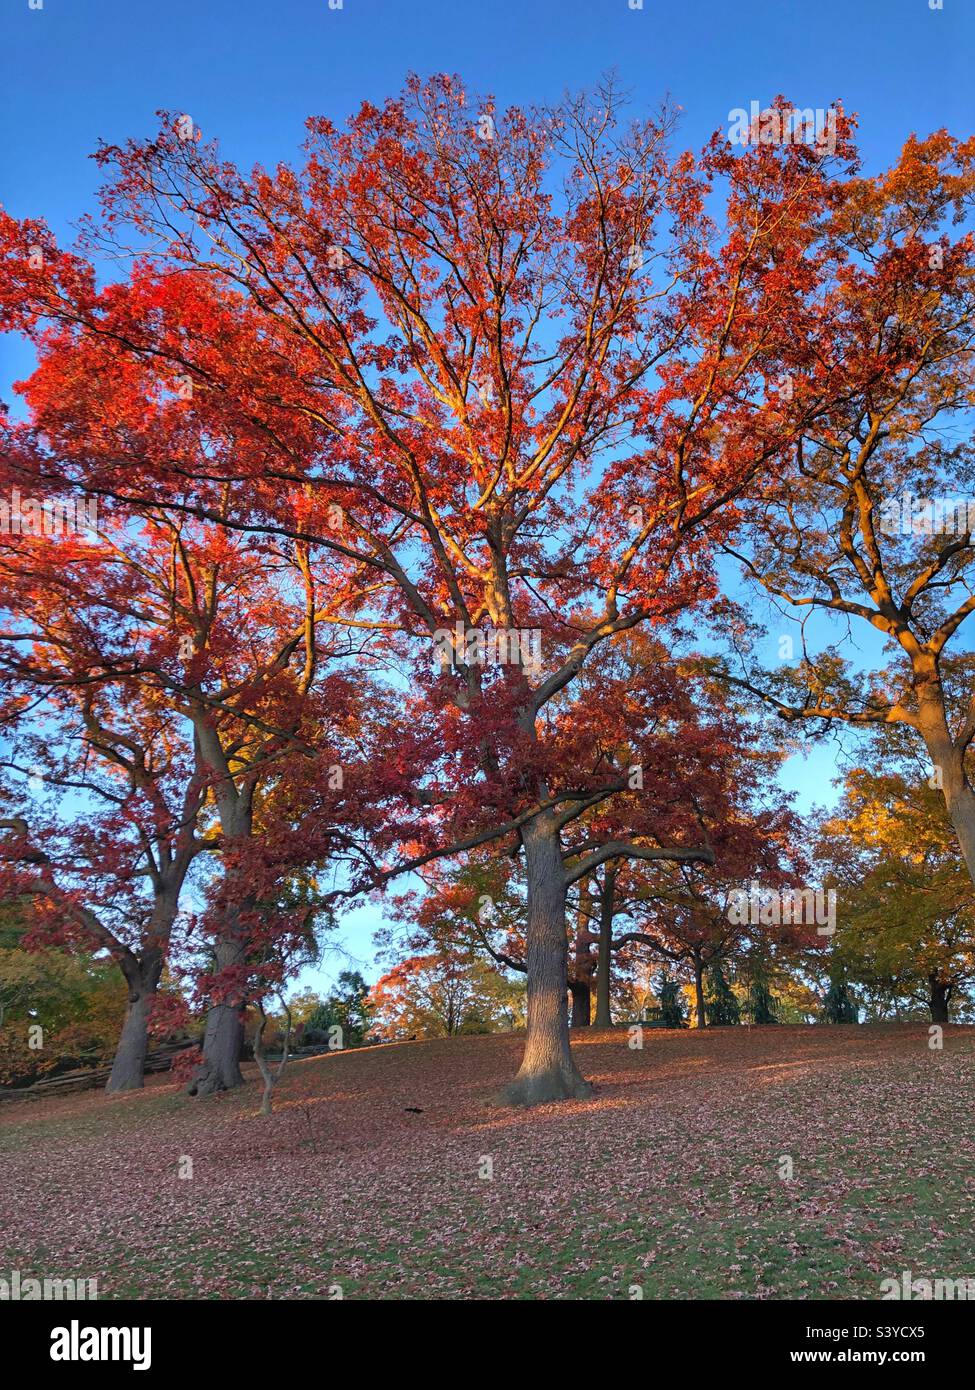 Autumn red foliage in a peaceful park landscape. Stock Photo